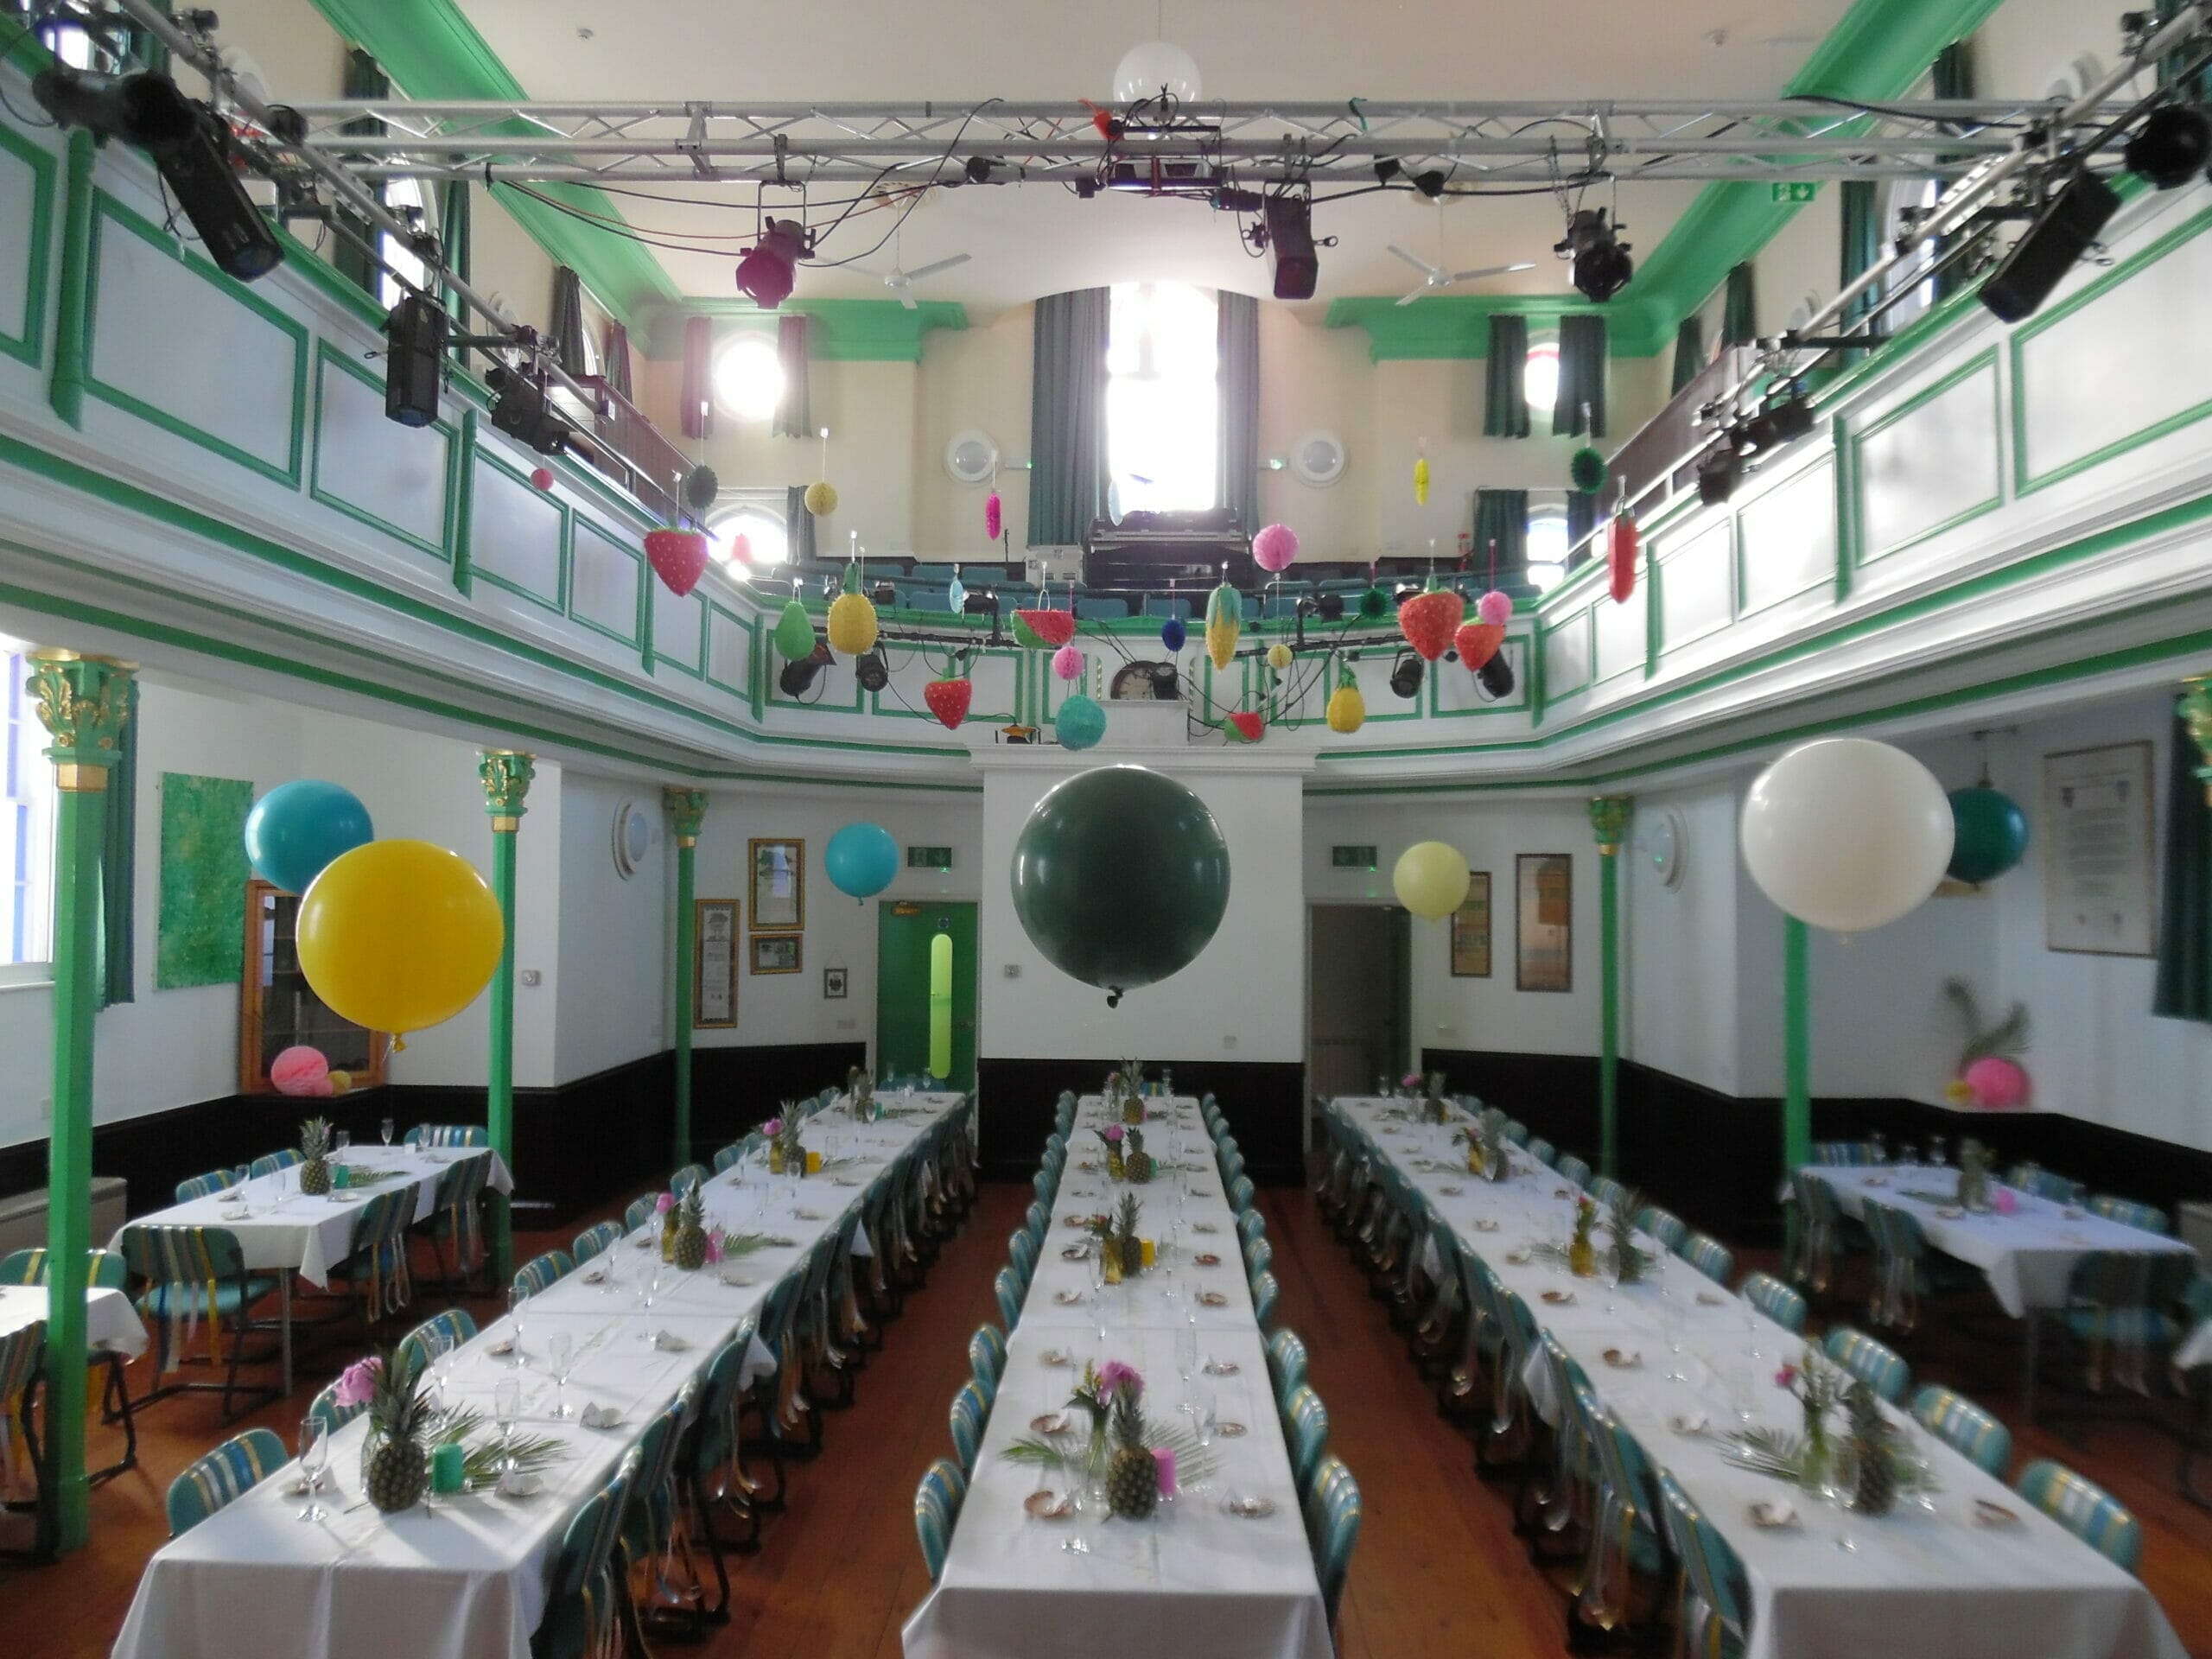 Photo shows a room layout with tressle tables and balloons